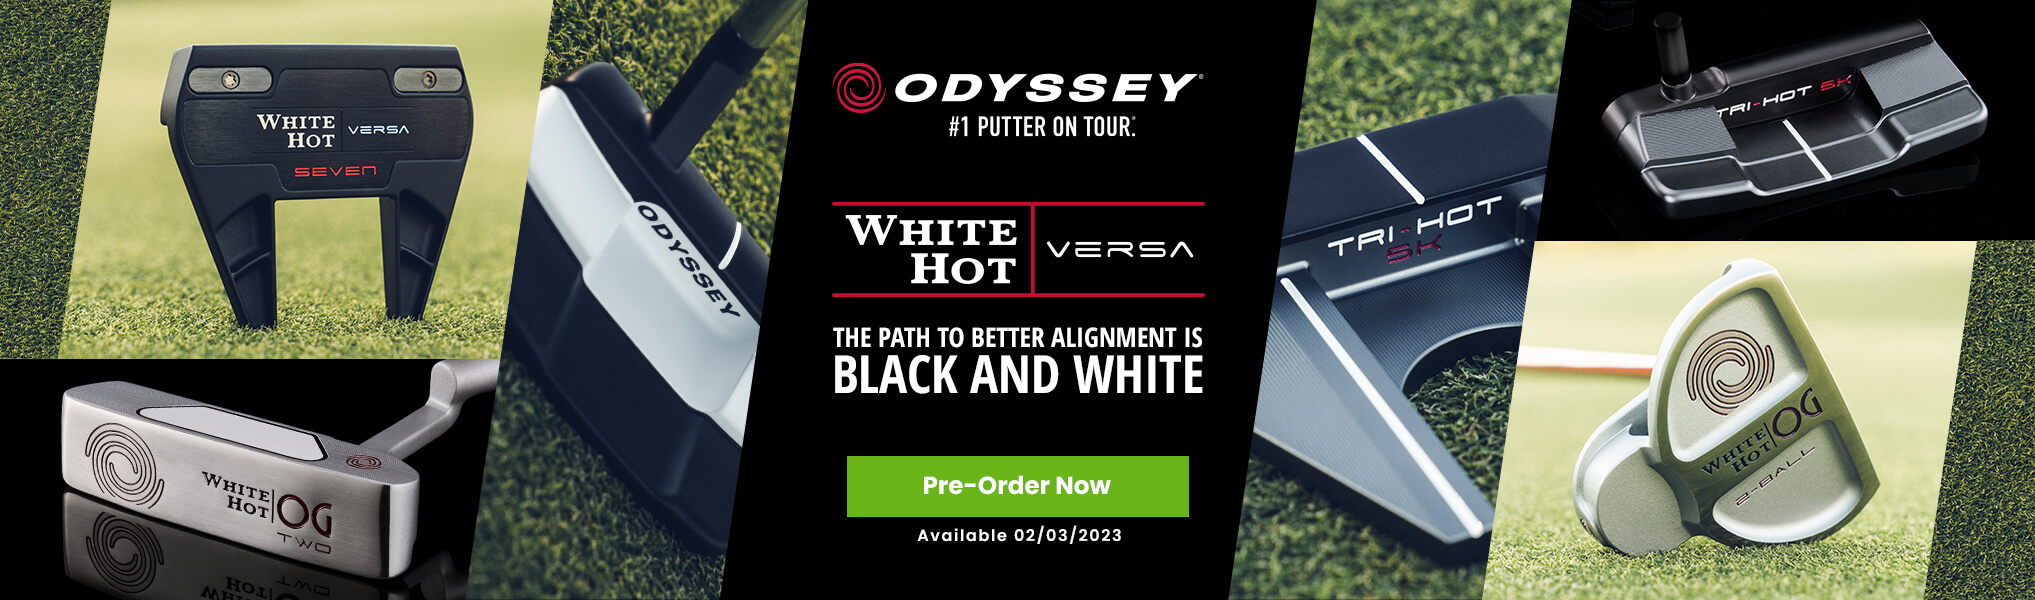 Pre-Sale Odyssey Putters Available 2/3/23 